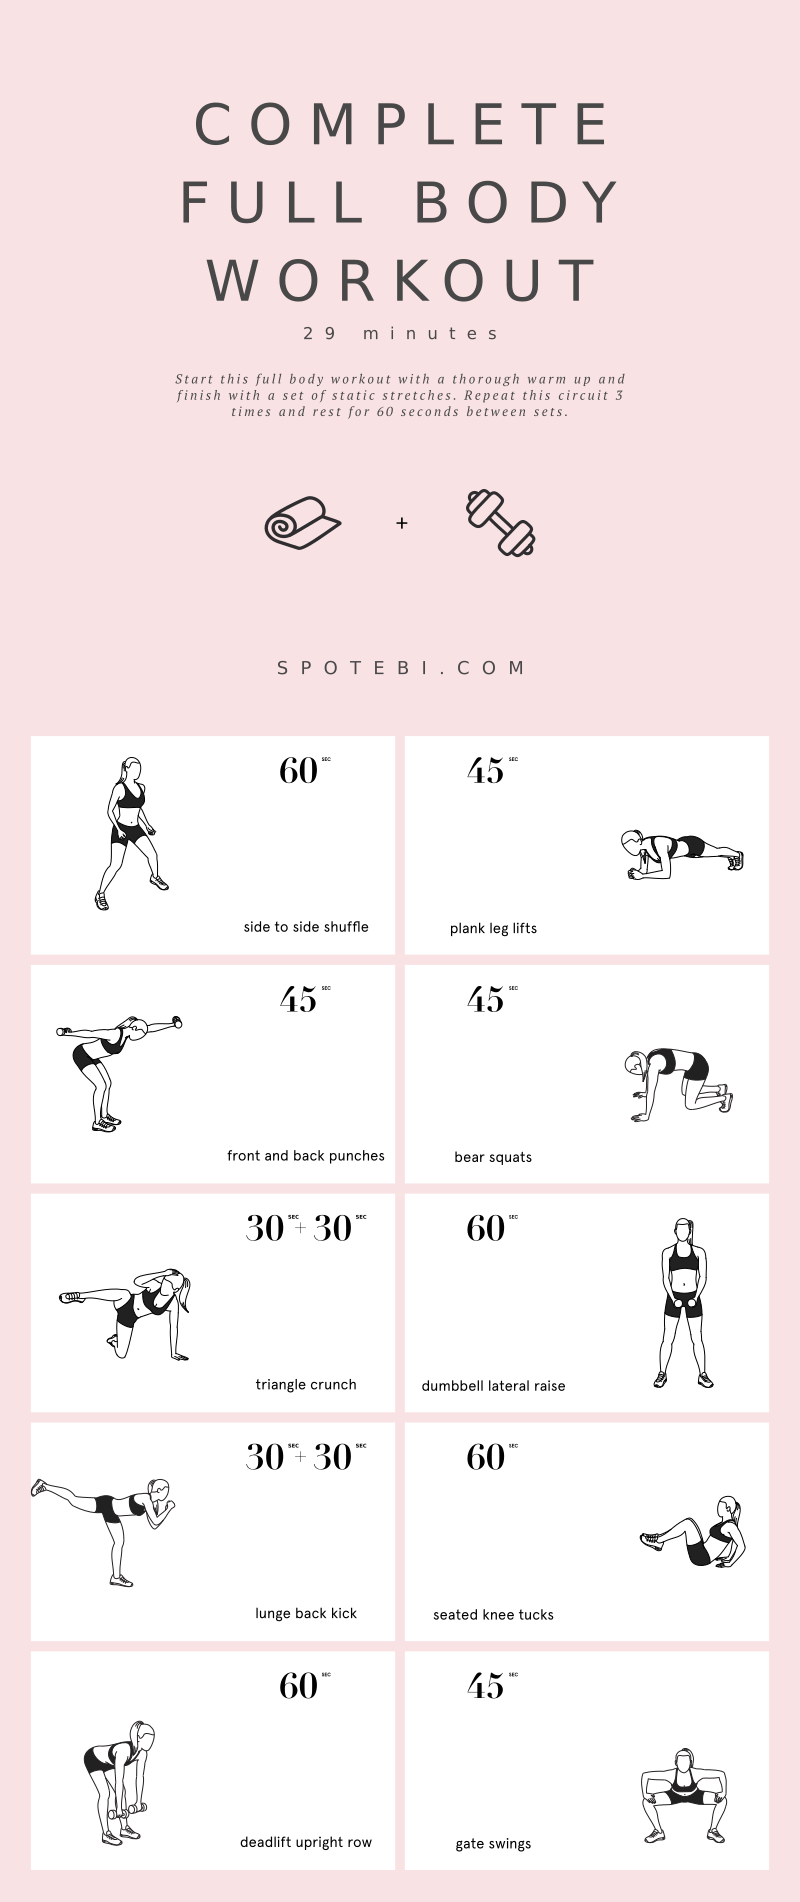 Tone your whole body and burn excess fat with this complete full body workout you can do at home. Grab a set of dumbbells, get in the zone, and blast those extra calories in just 29 minutes! https://www.spotebi.com/workout-routines/complete-full-body-workout/